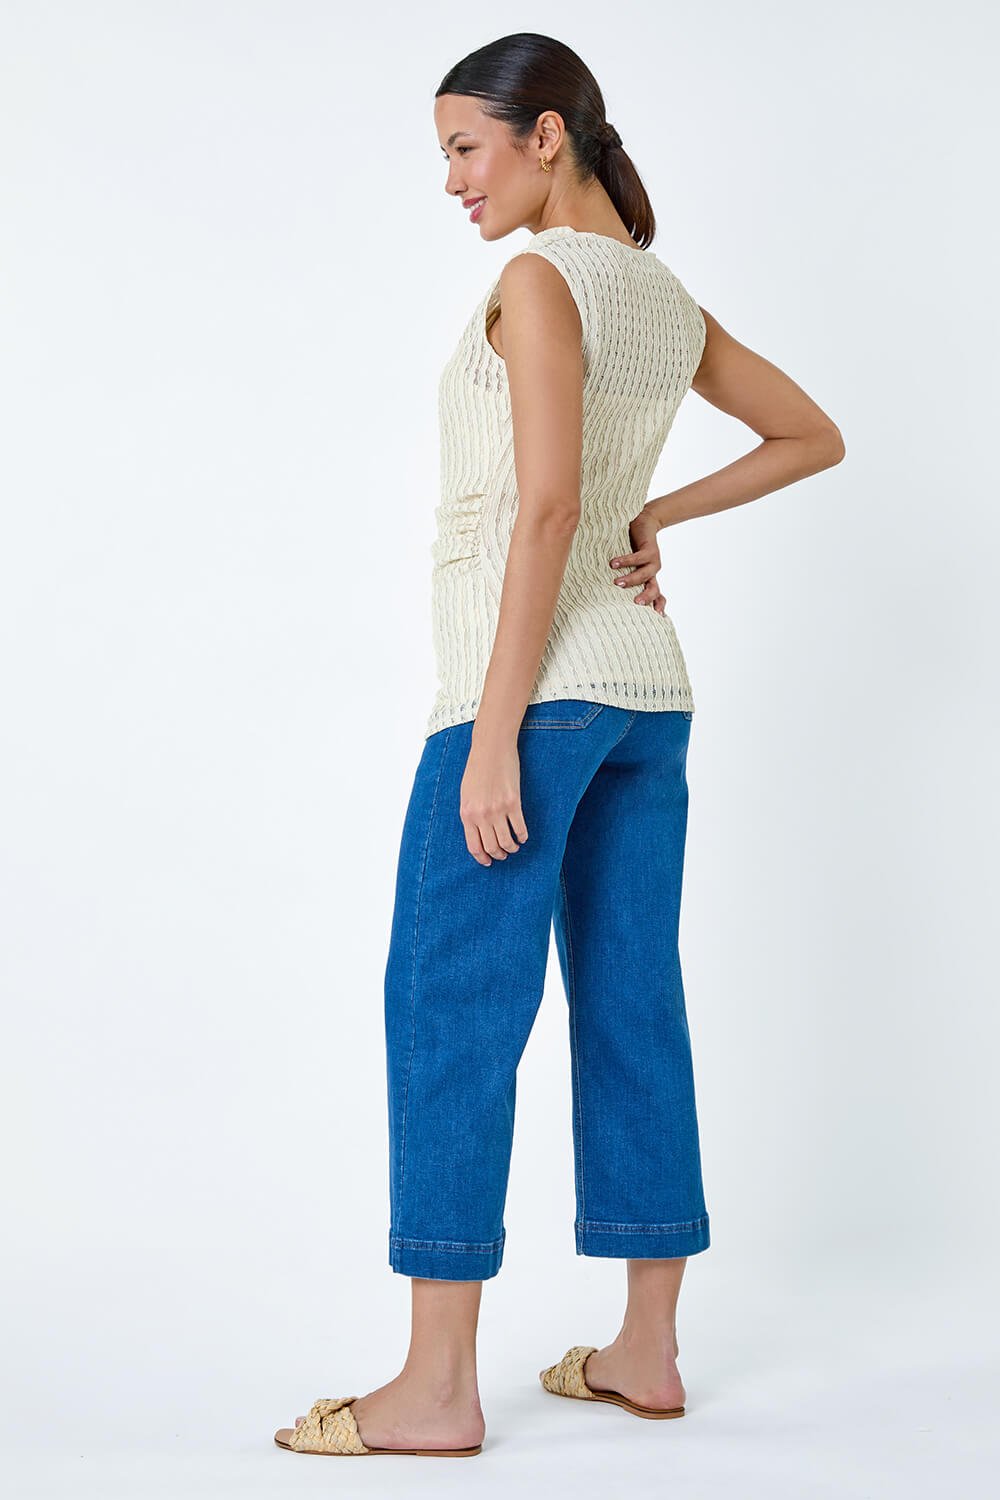 Natural  Textured High Neck Sleeveless Stretch Top, Image 3 of 5